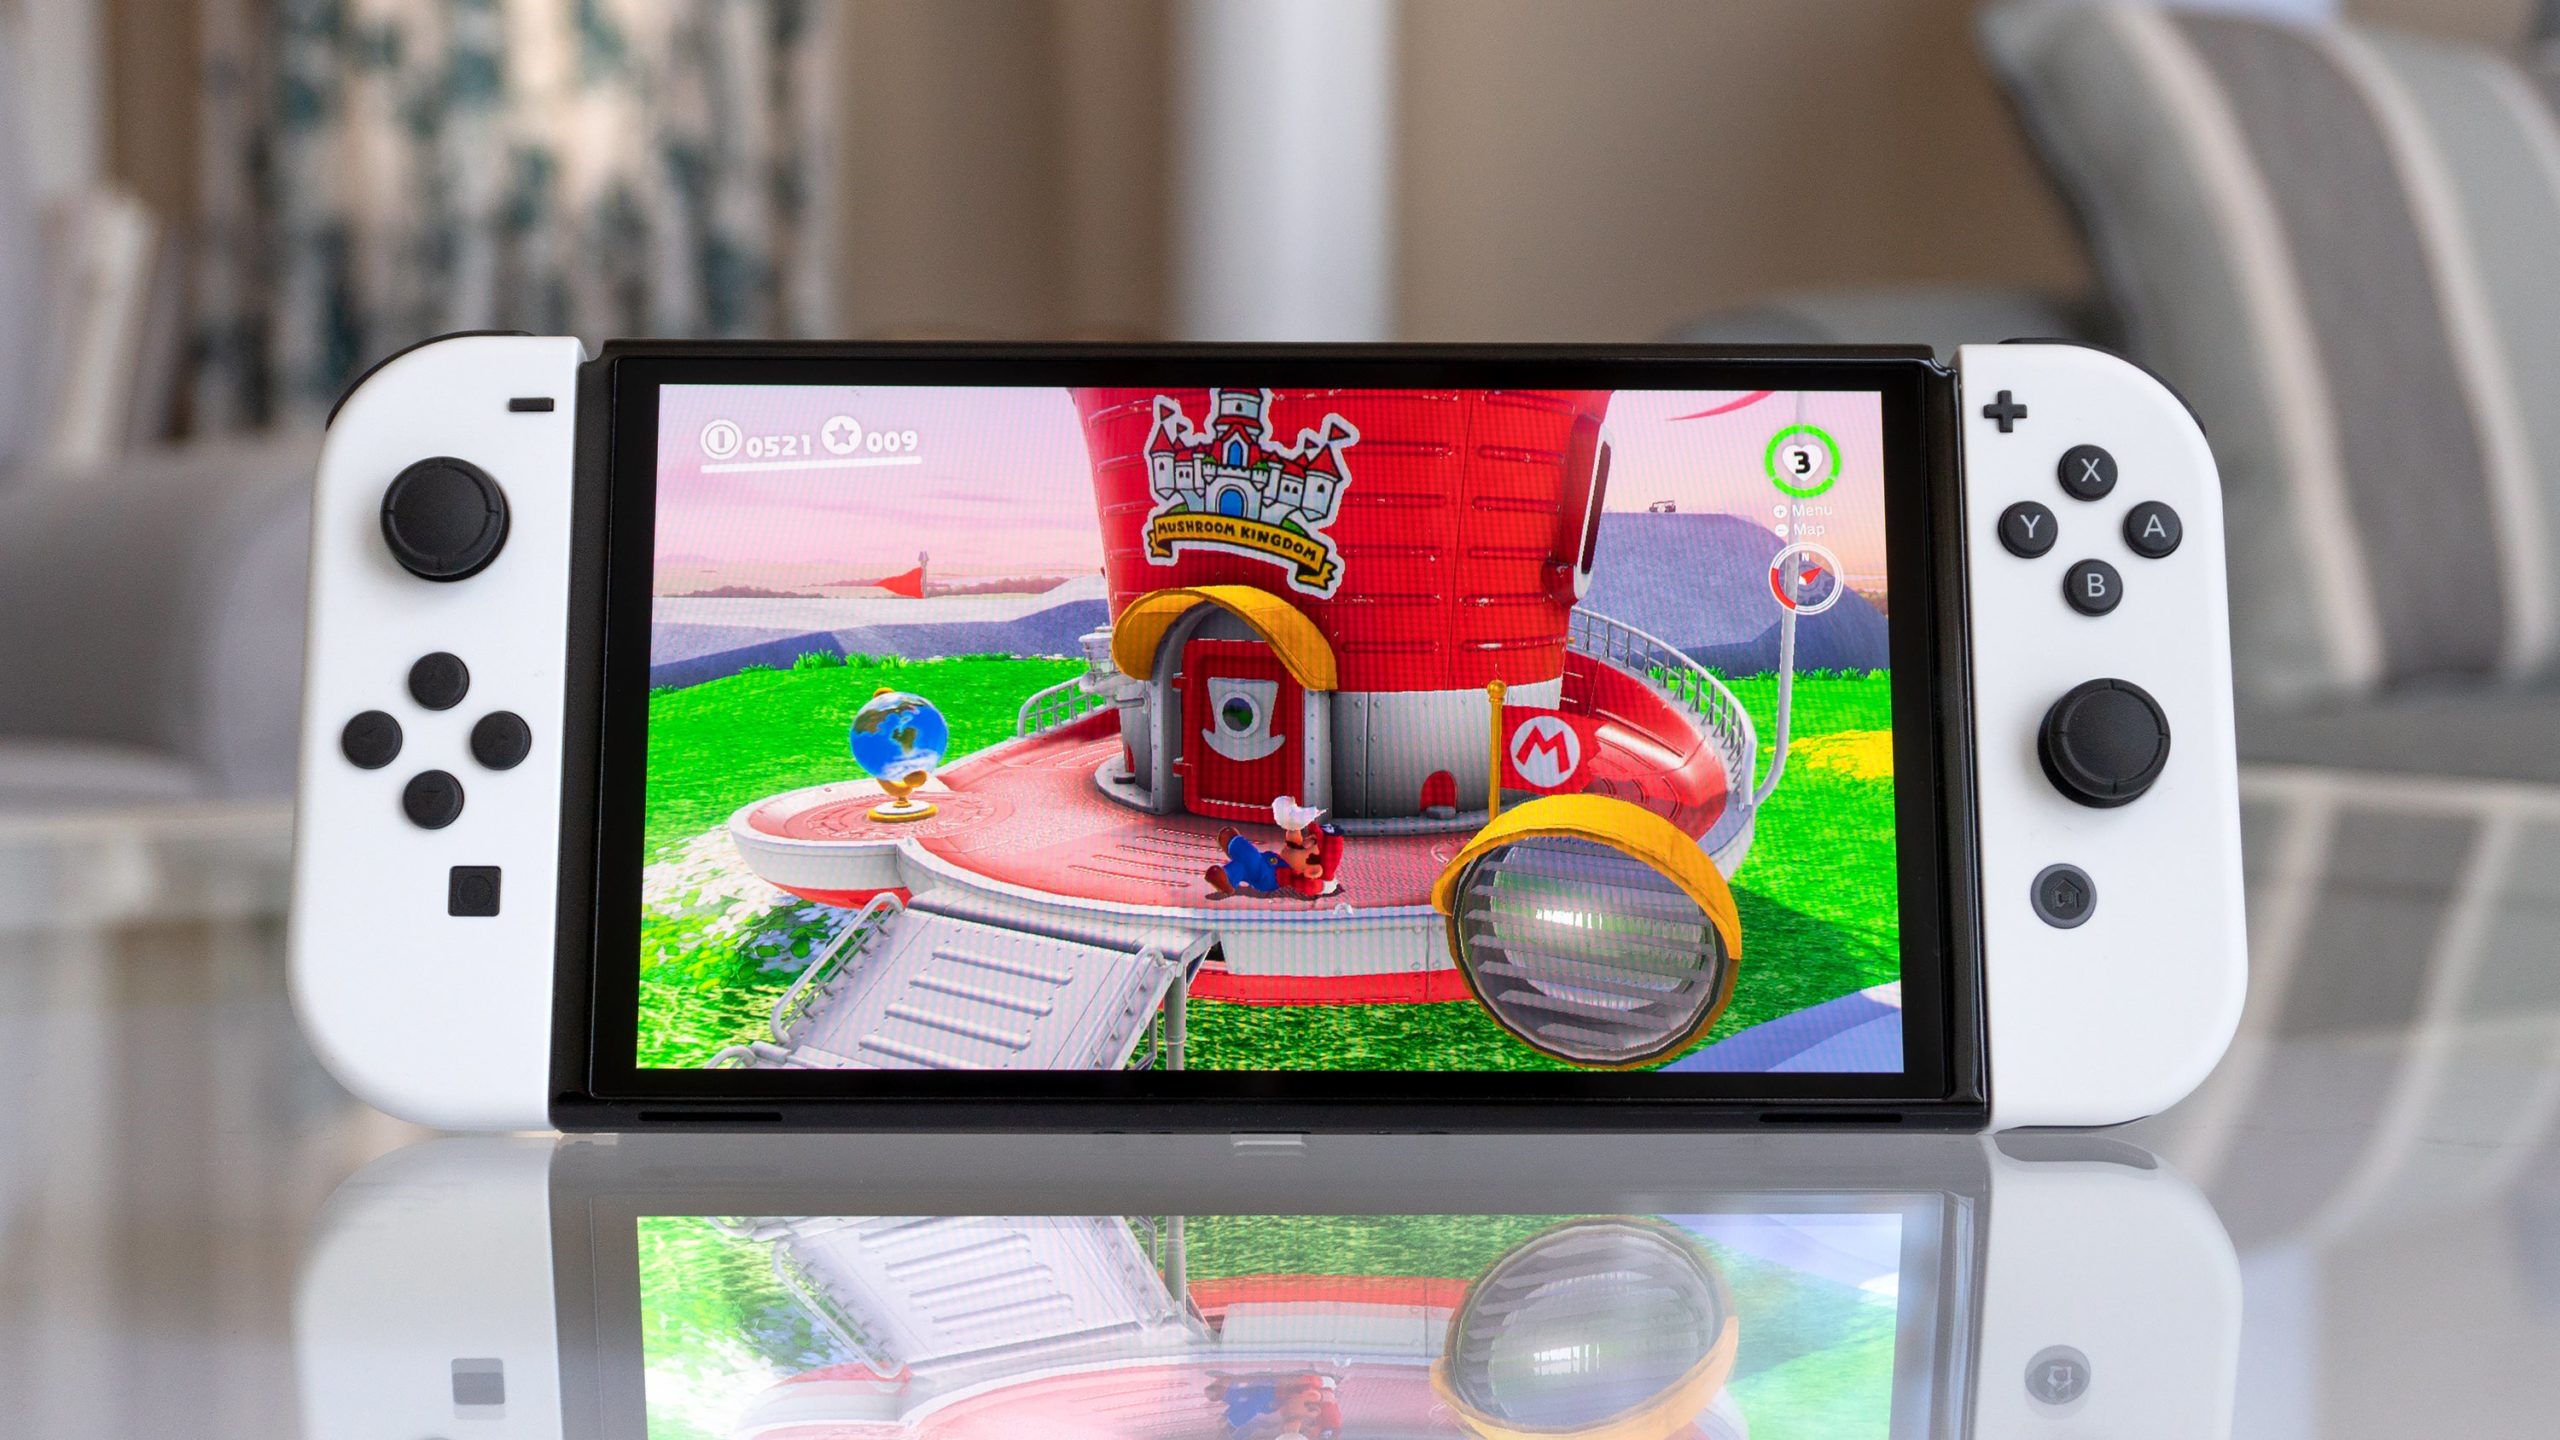 Colourful games like Super Mario Odyssey really pop on the Switch OLED, and you'll want to play them all the way through again. (Photo: Andrew Liszewski - Gizmodo)